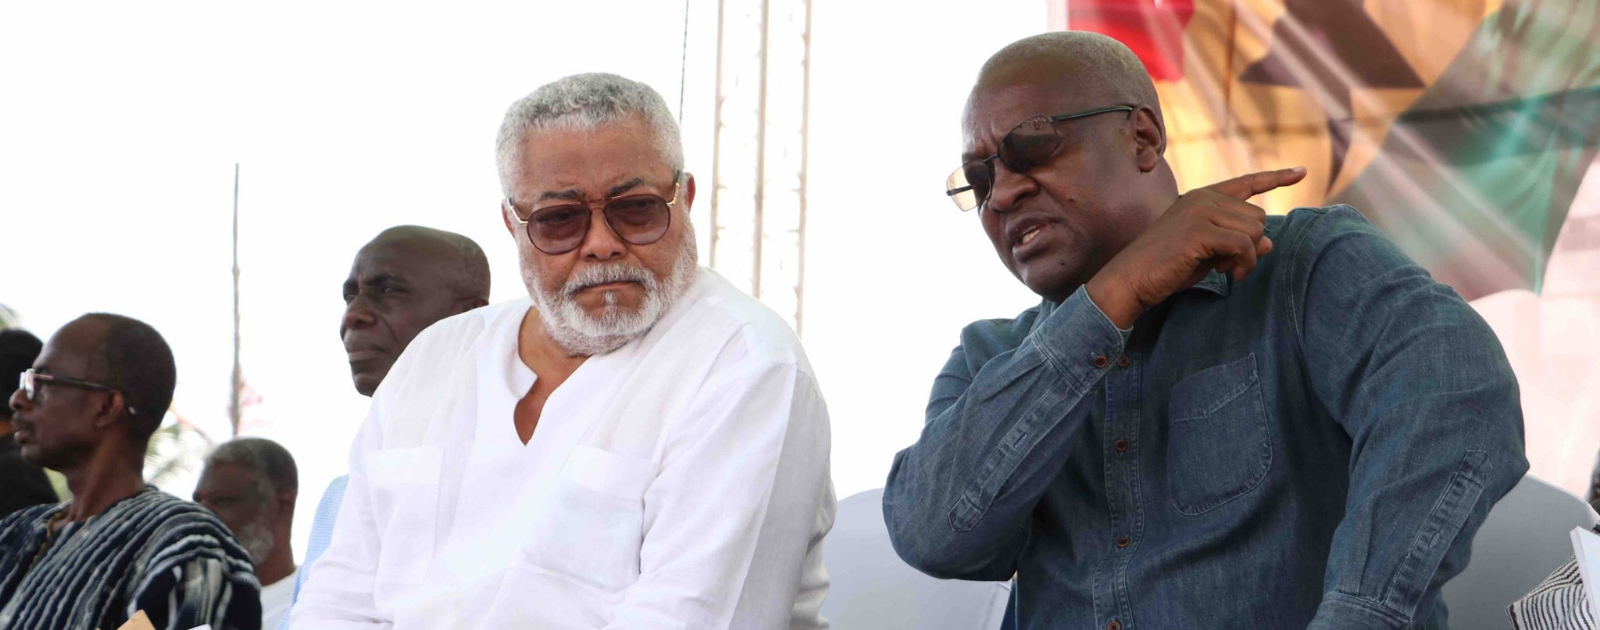 The revisionists will attempt to denigrate Rawlings in history - Mahama